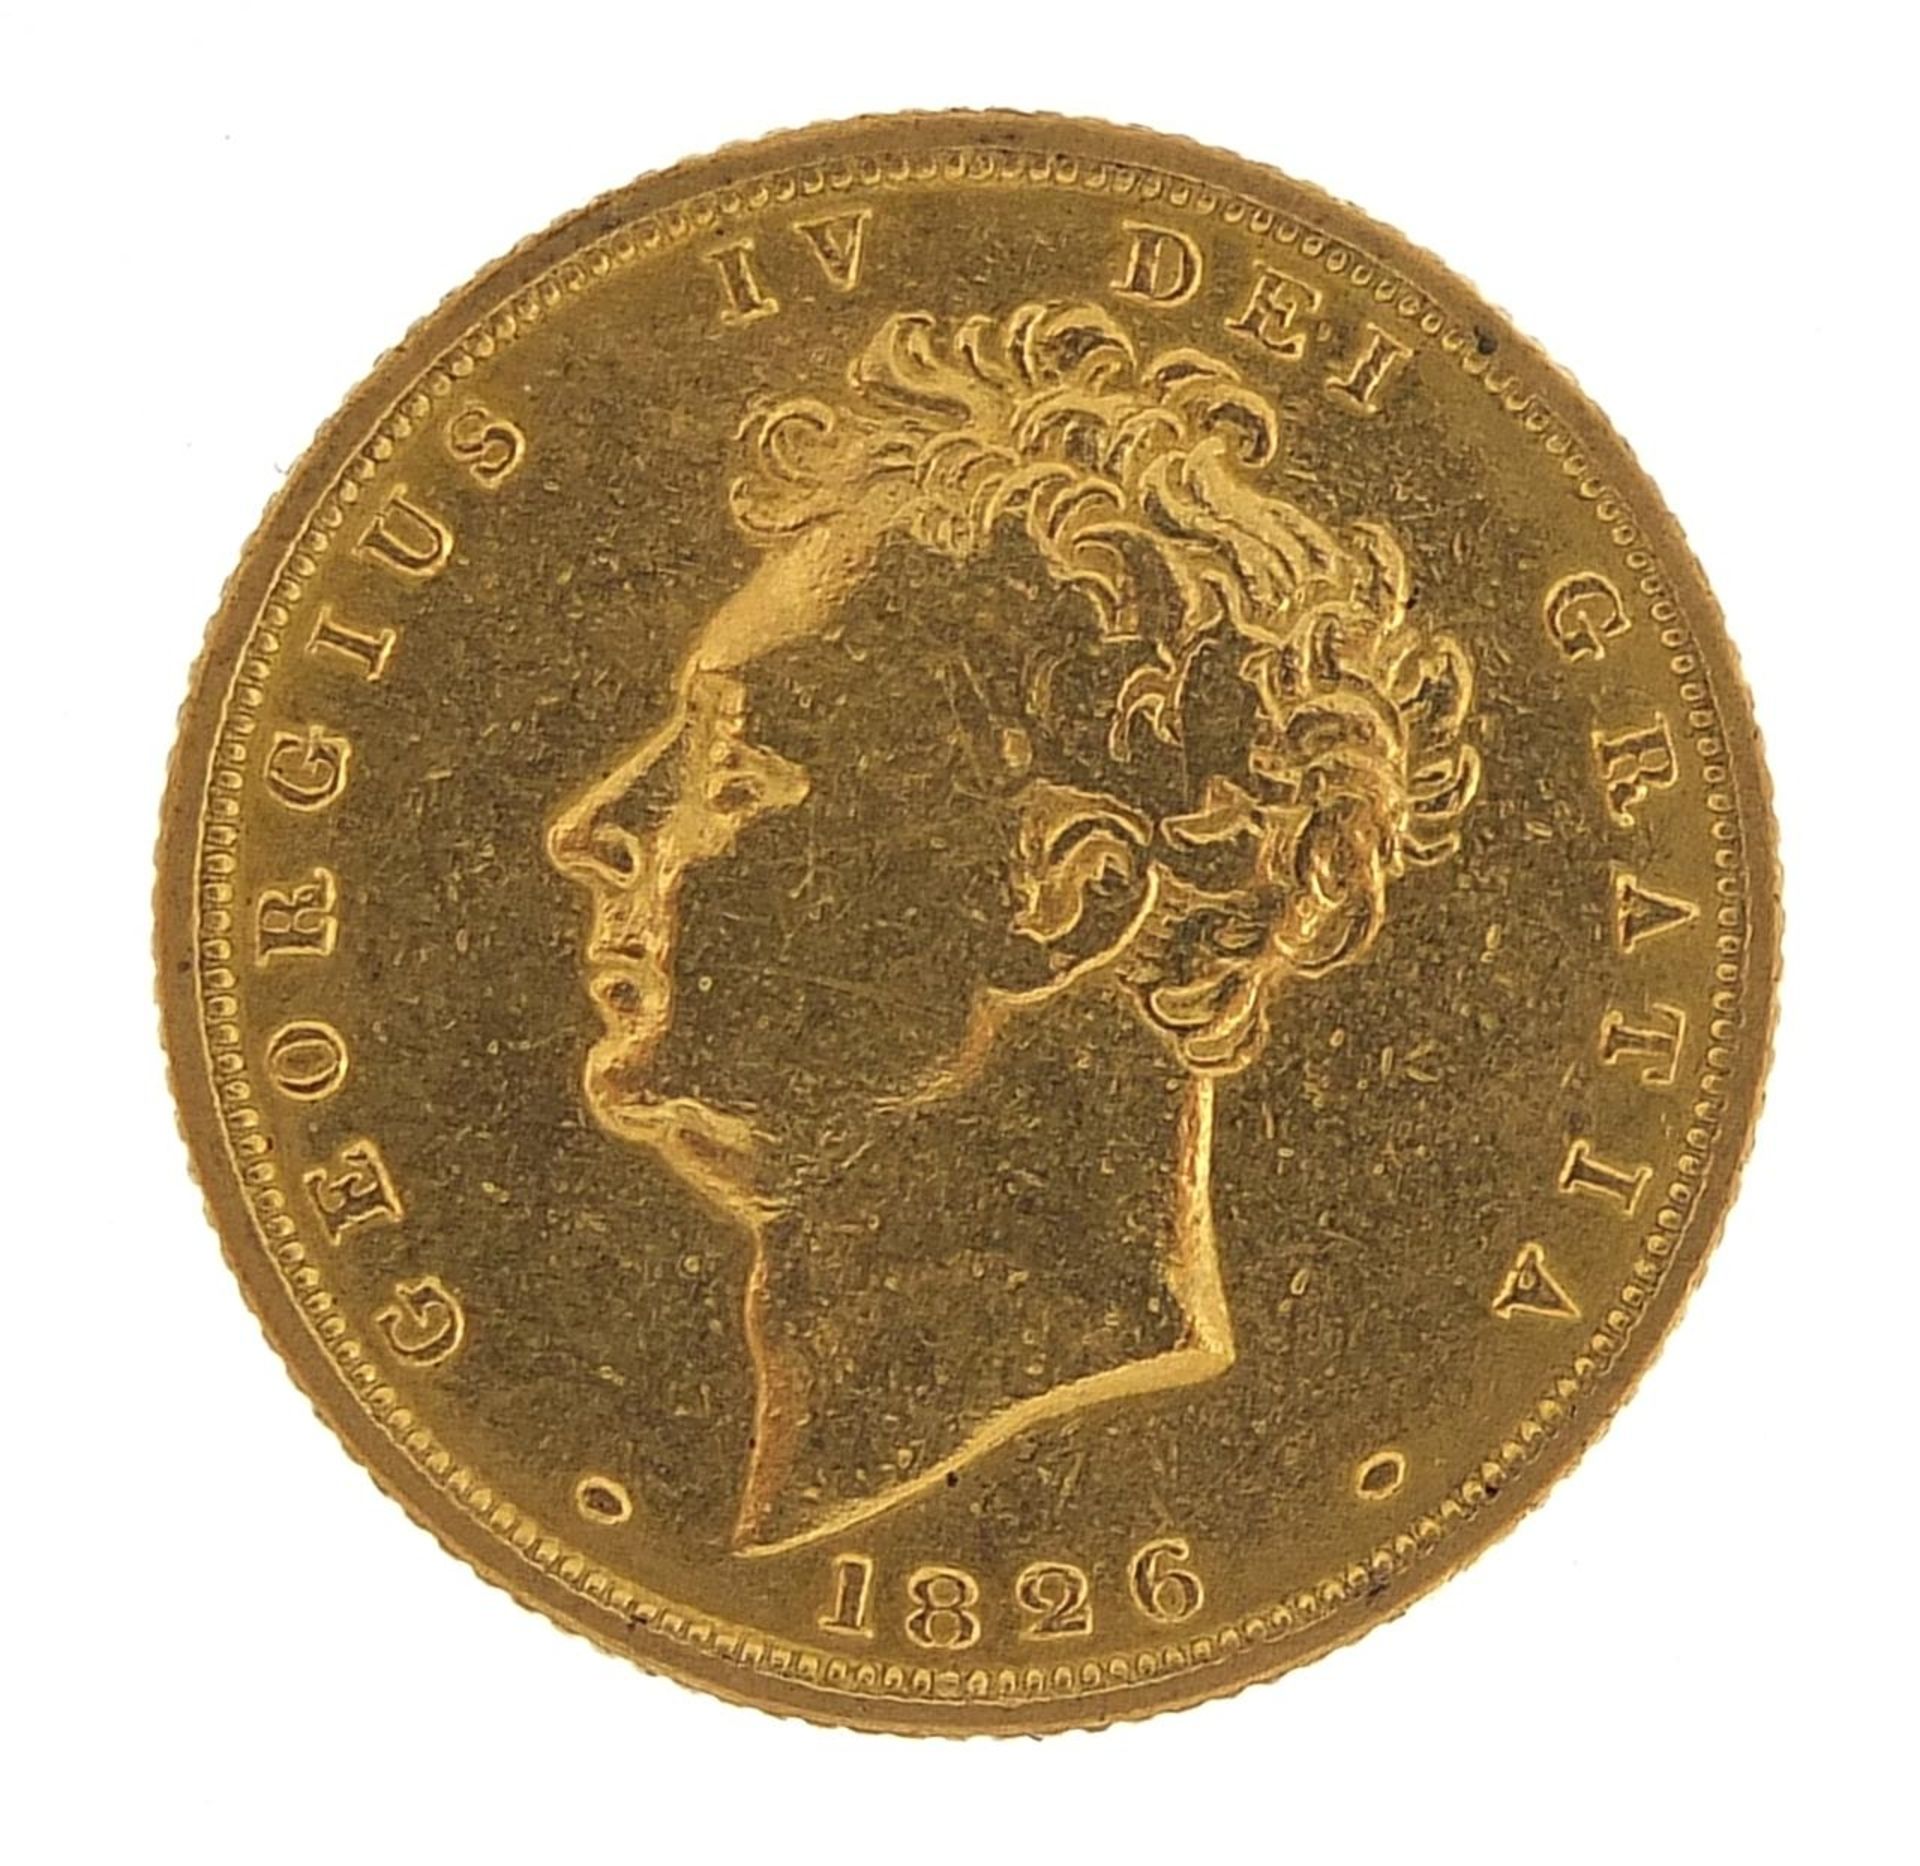 George IV 1826 gold shield back sovereign - this lot is sold without buyer's premium - Image 2 of 3